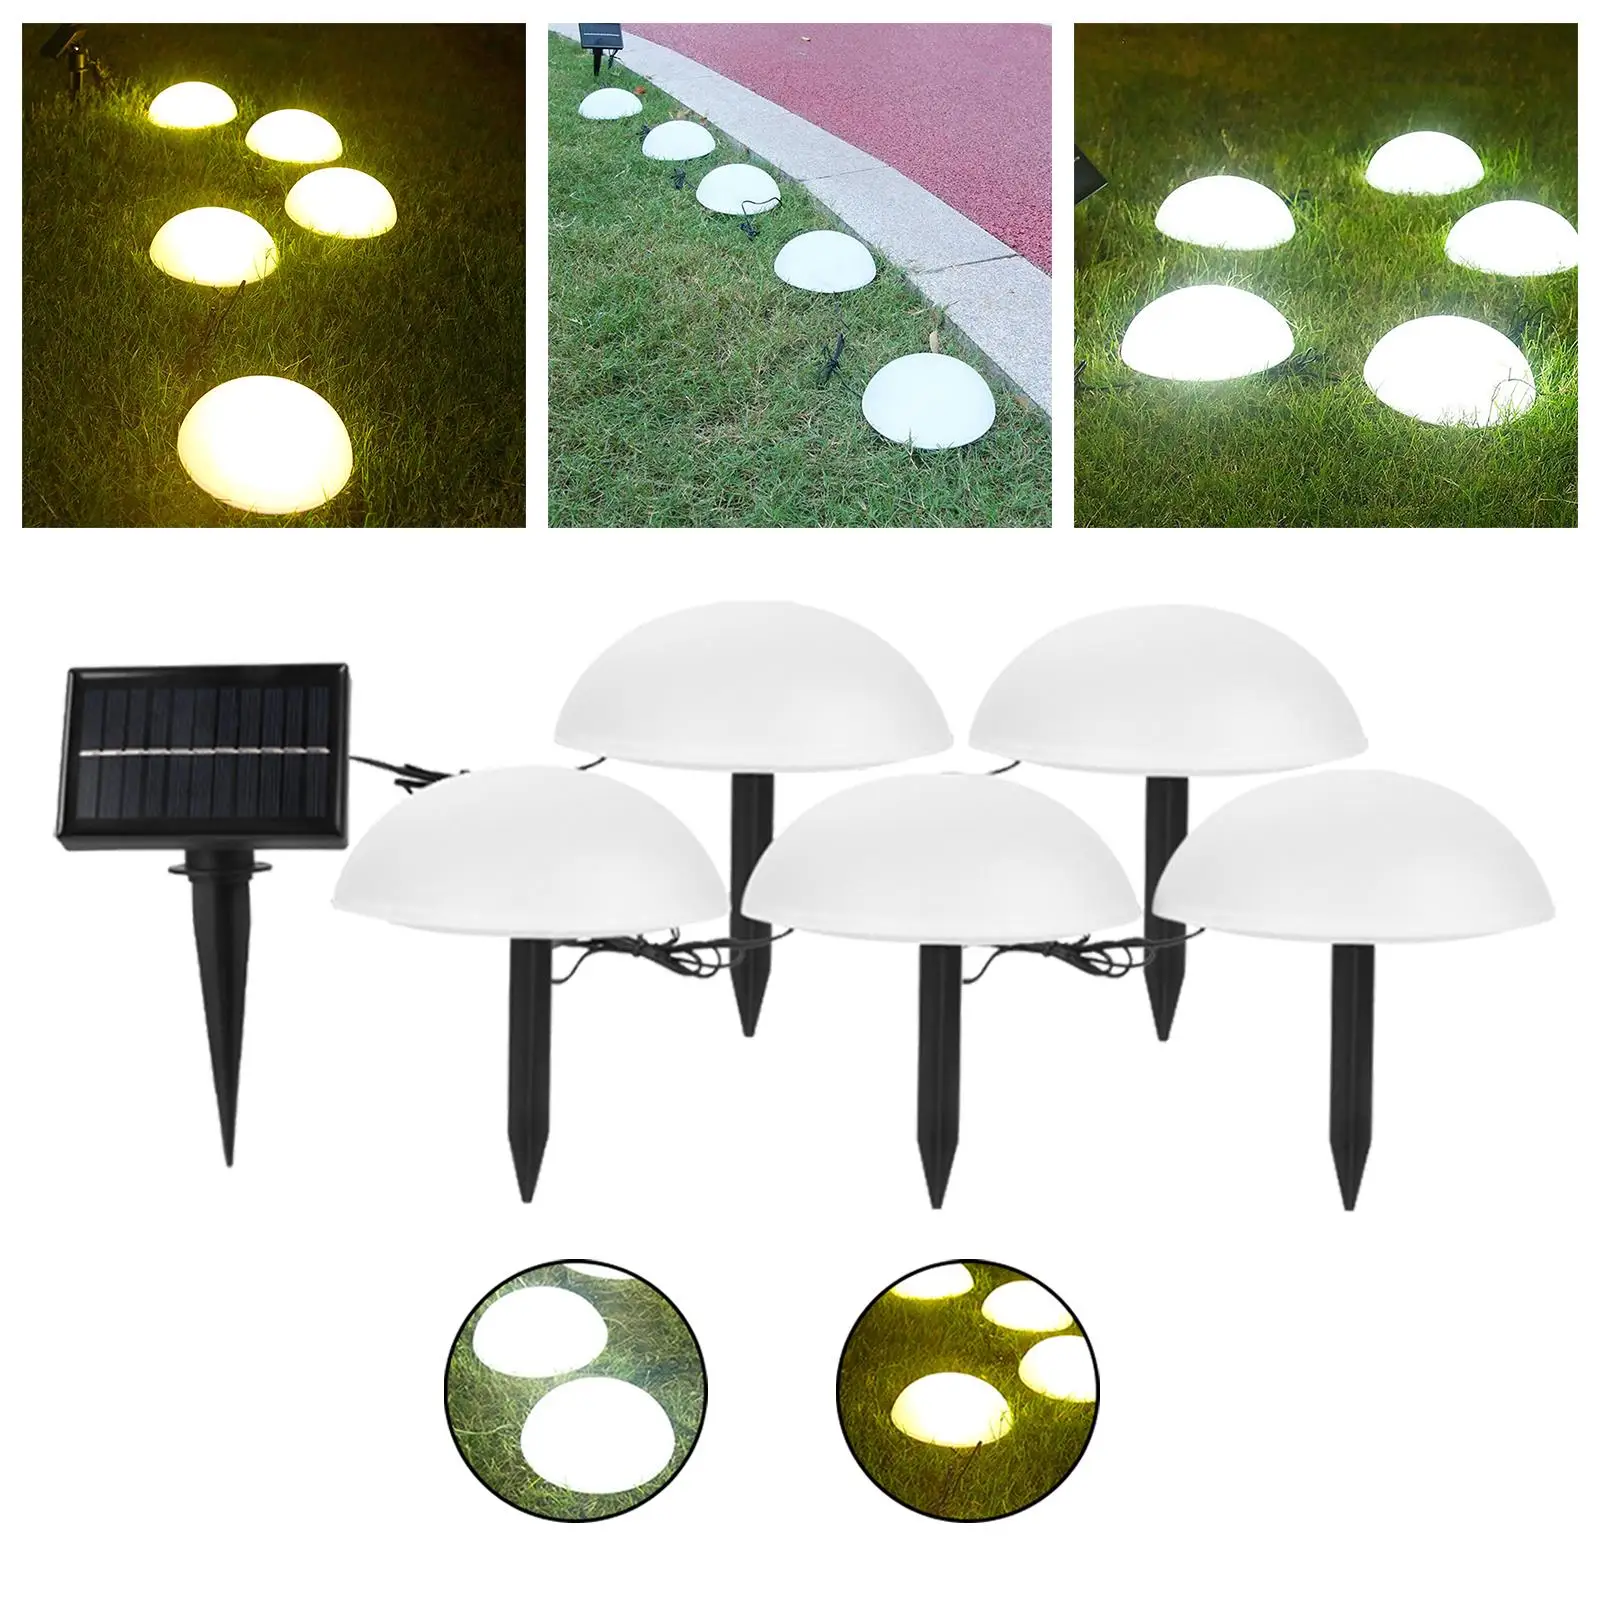 Solar Ground Lights Waterproof LED Easy Install for Driveway Patio Landscape